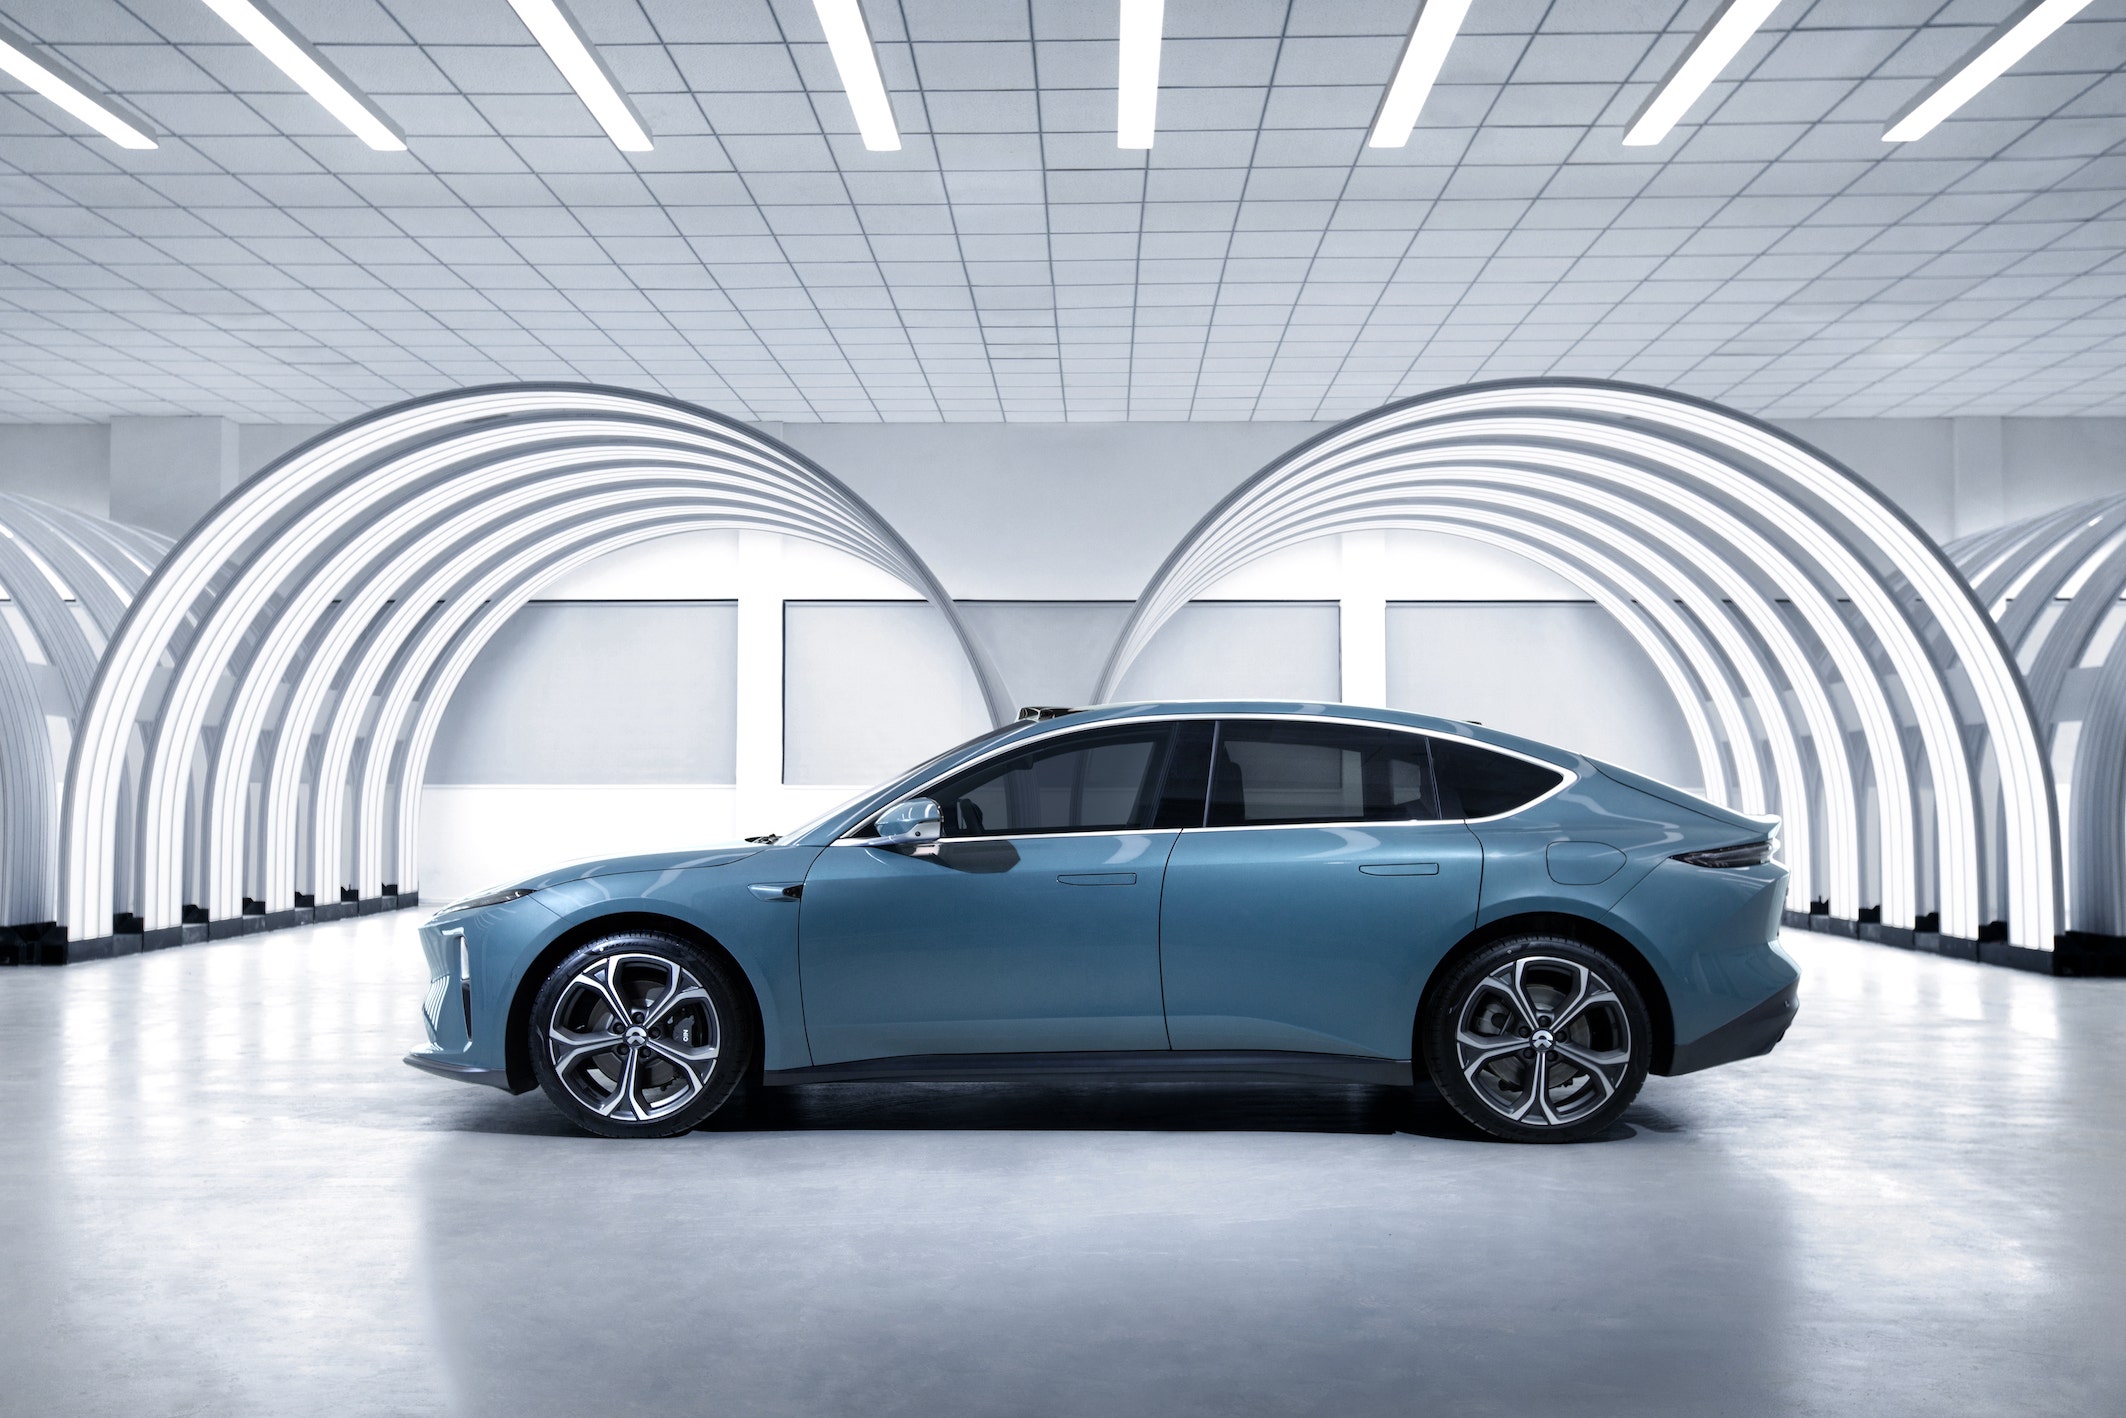 NIO Has Humongous Upside Despite Supply Chain Concerns, High Commodity Costs, Analyst Says